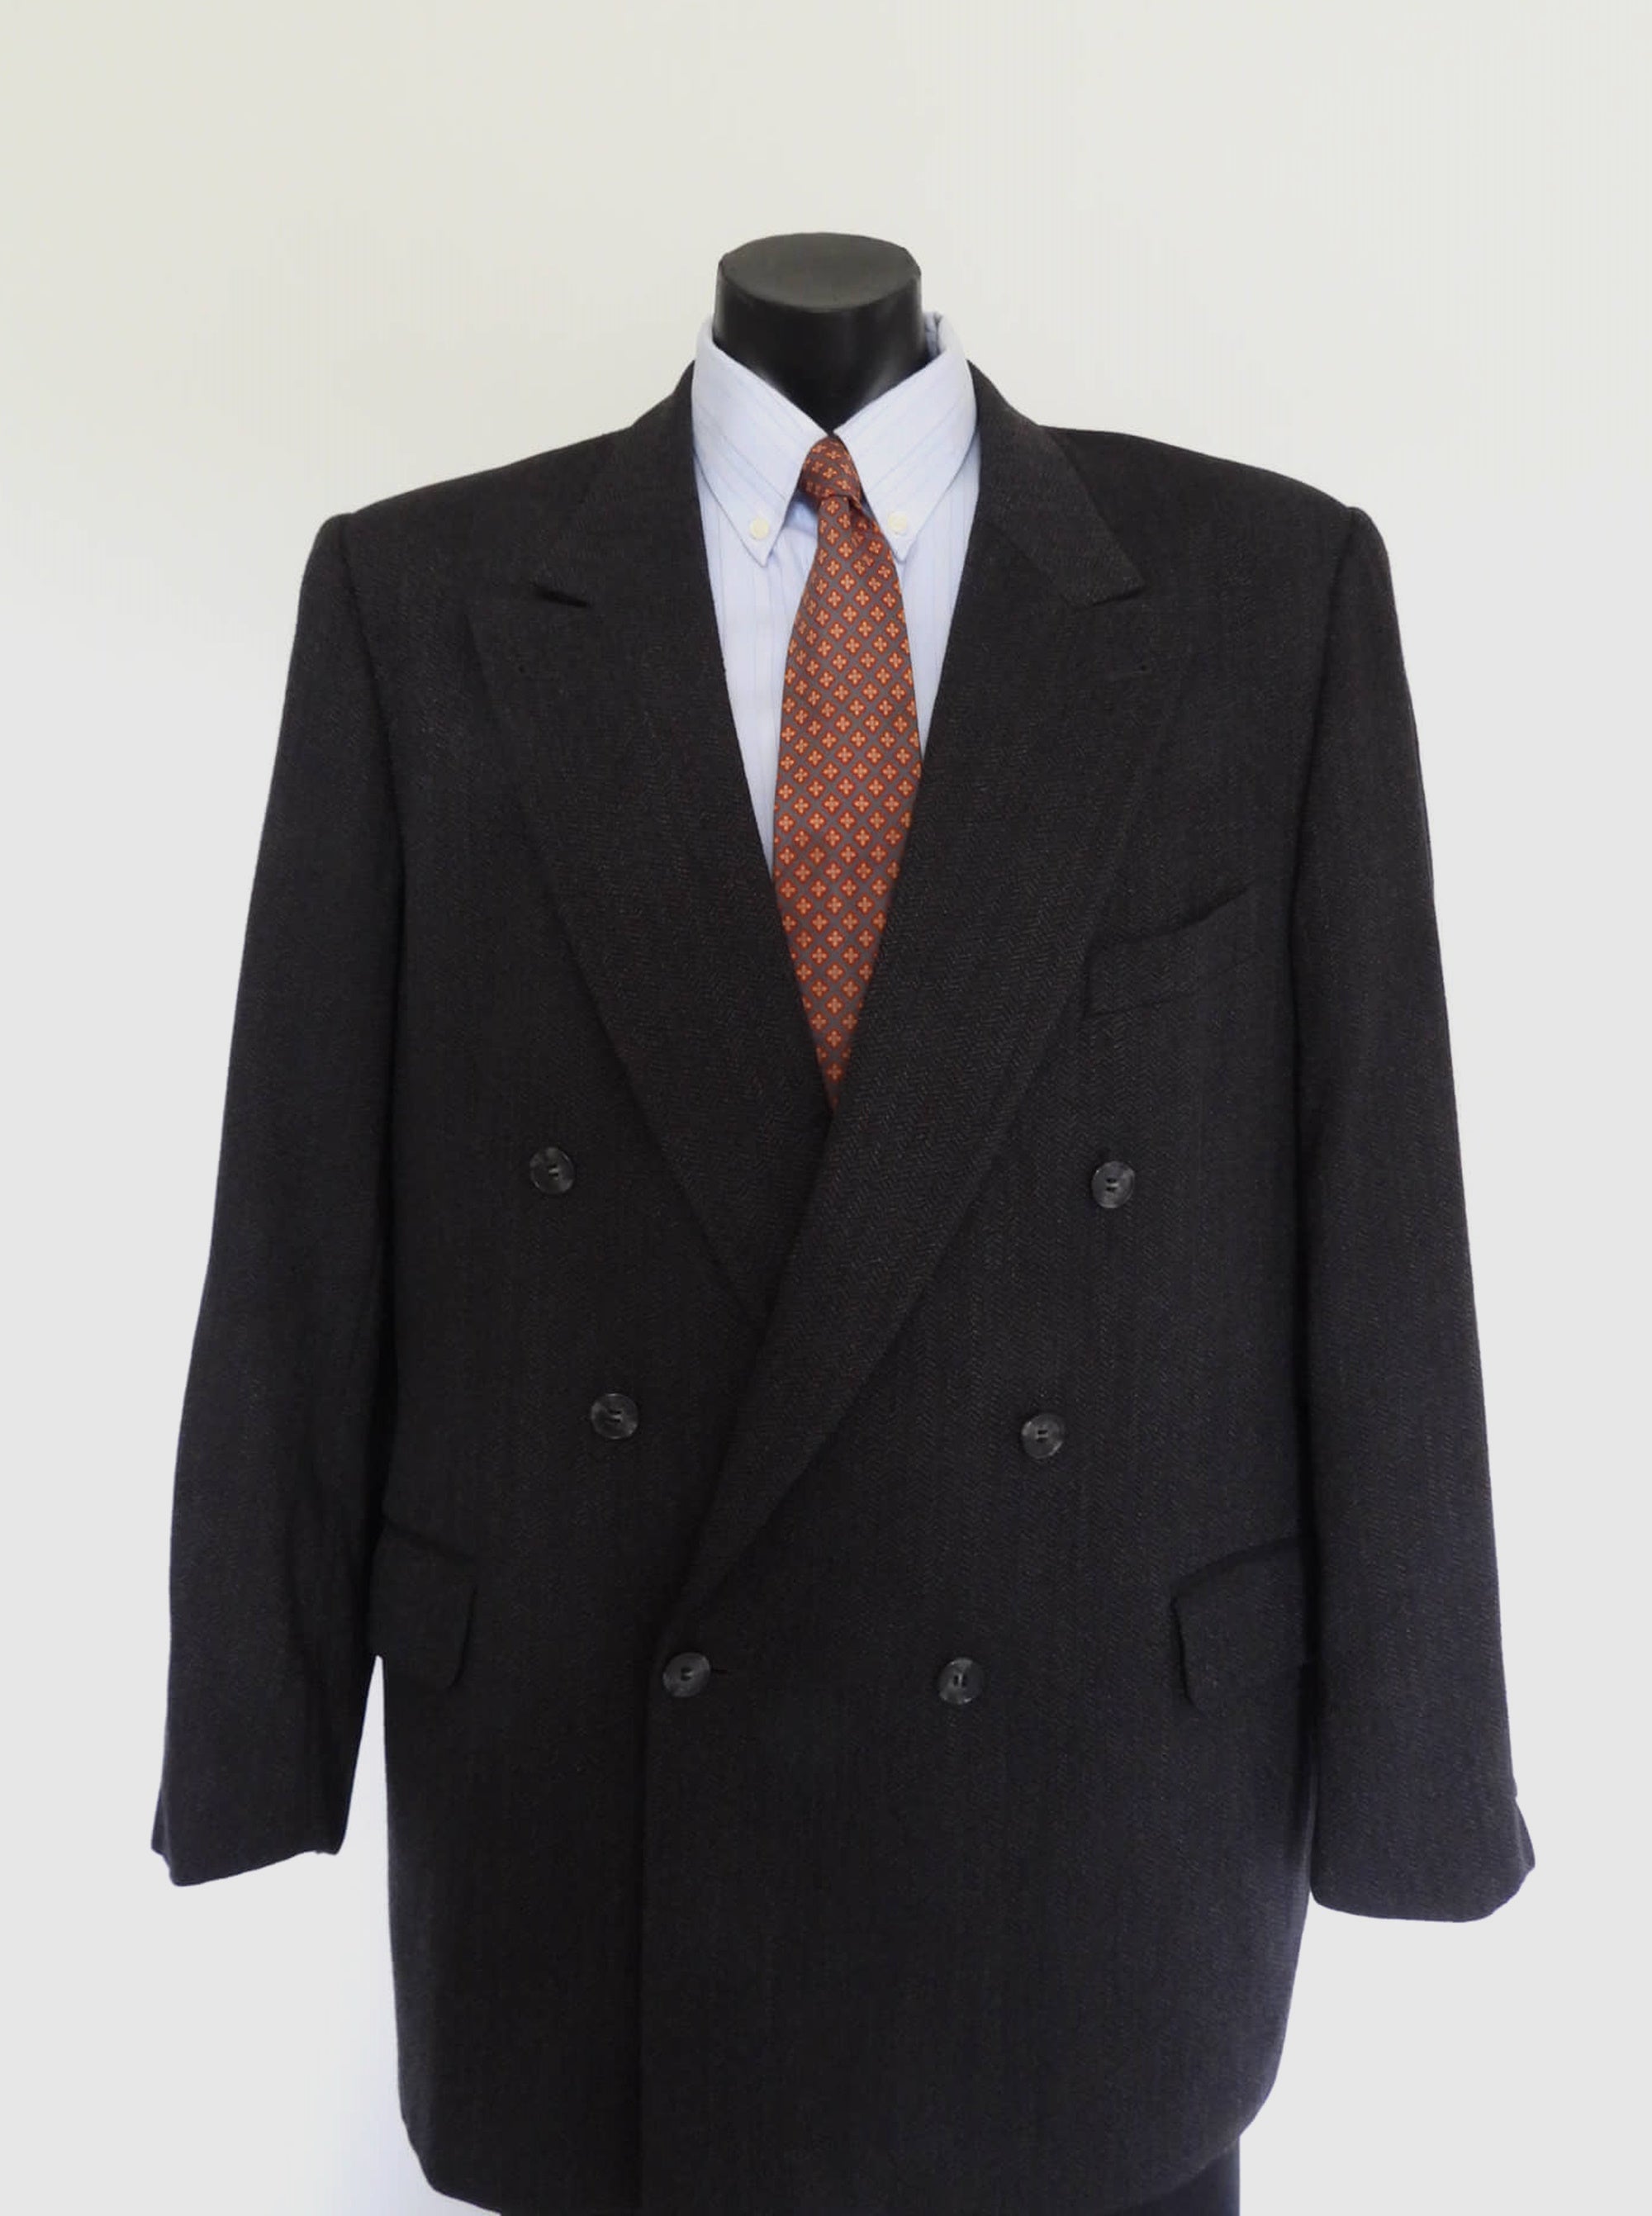 vintage grey herringbone double breasted suit by joseph abboud size 46R